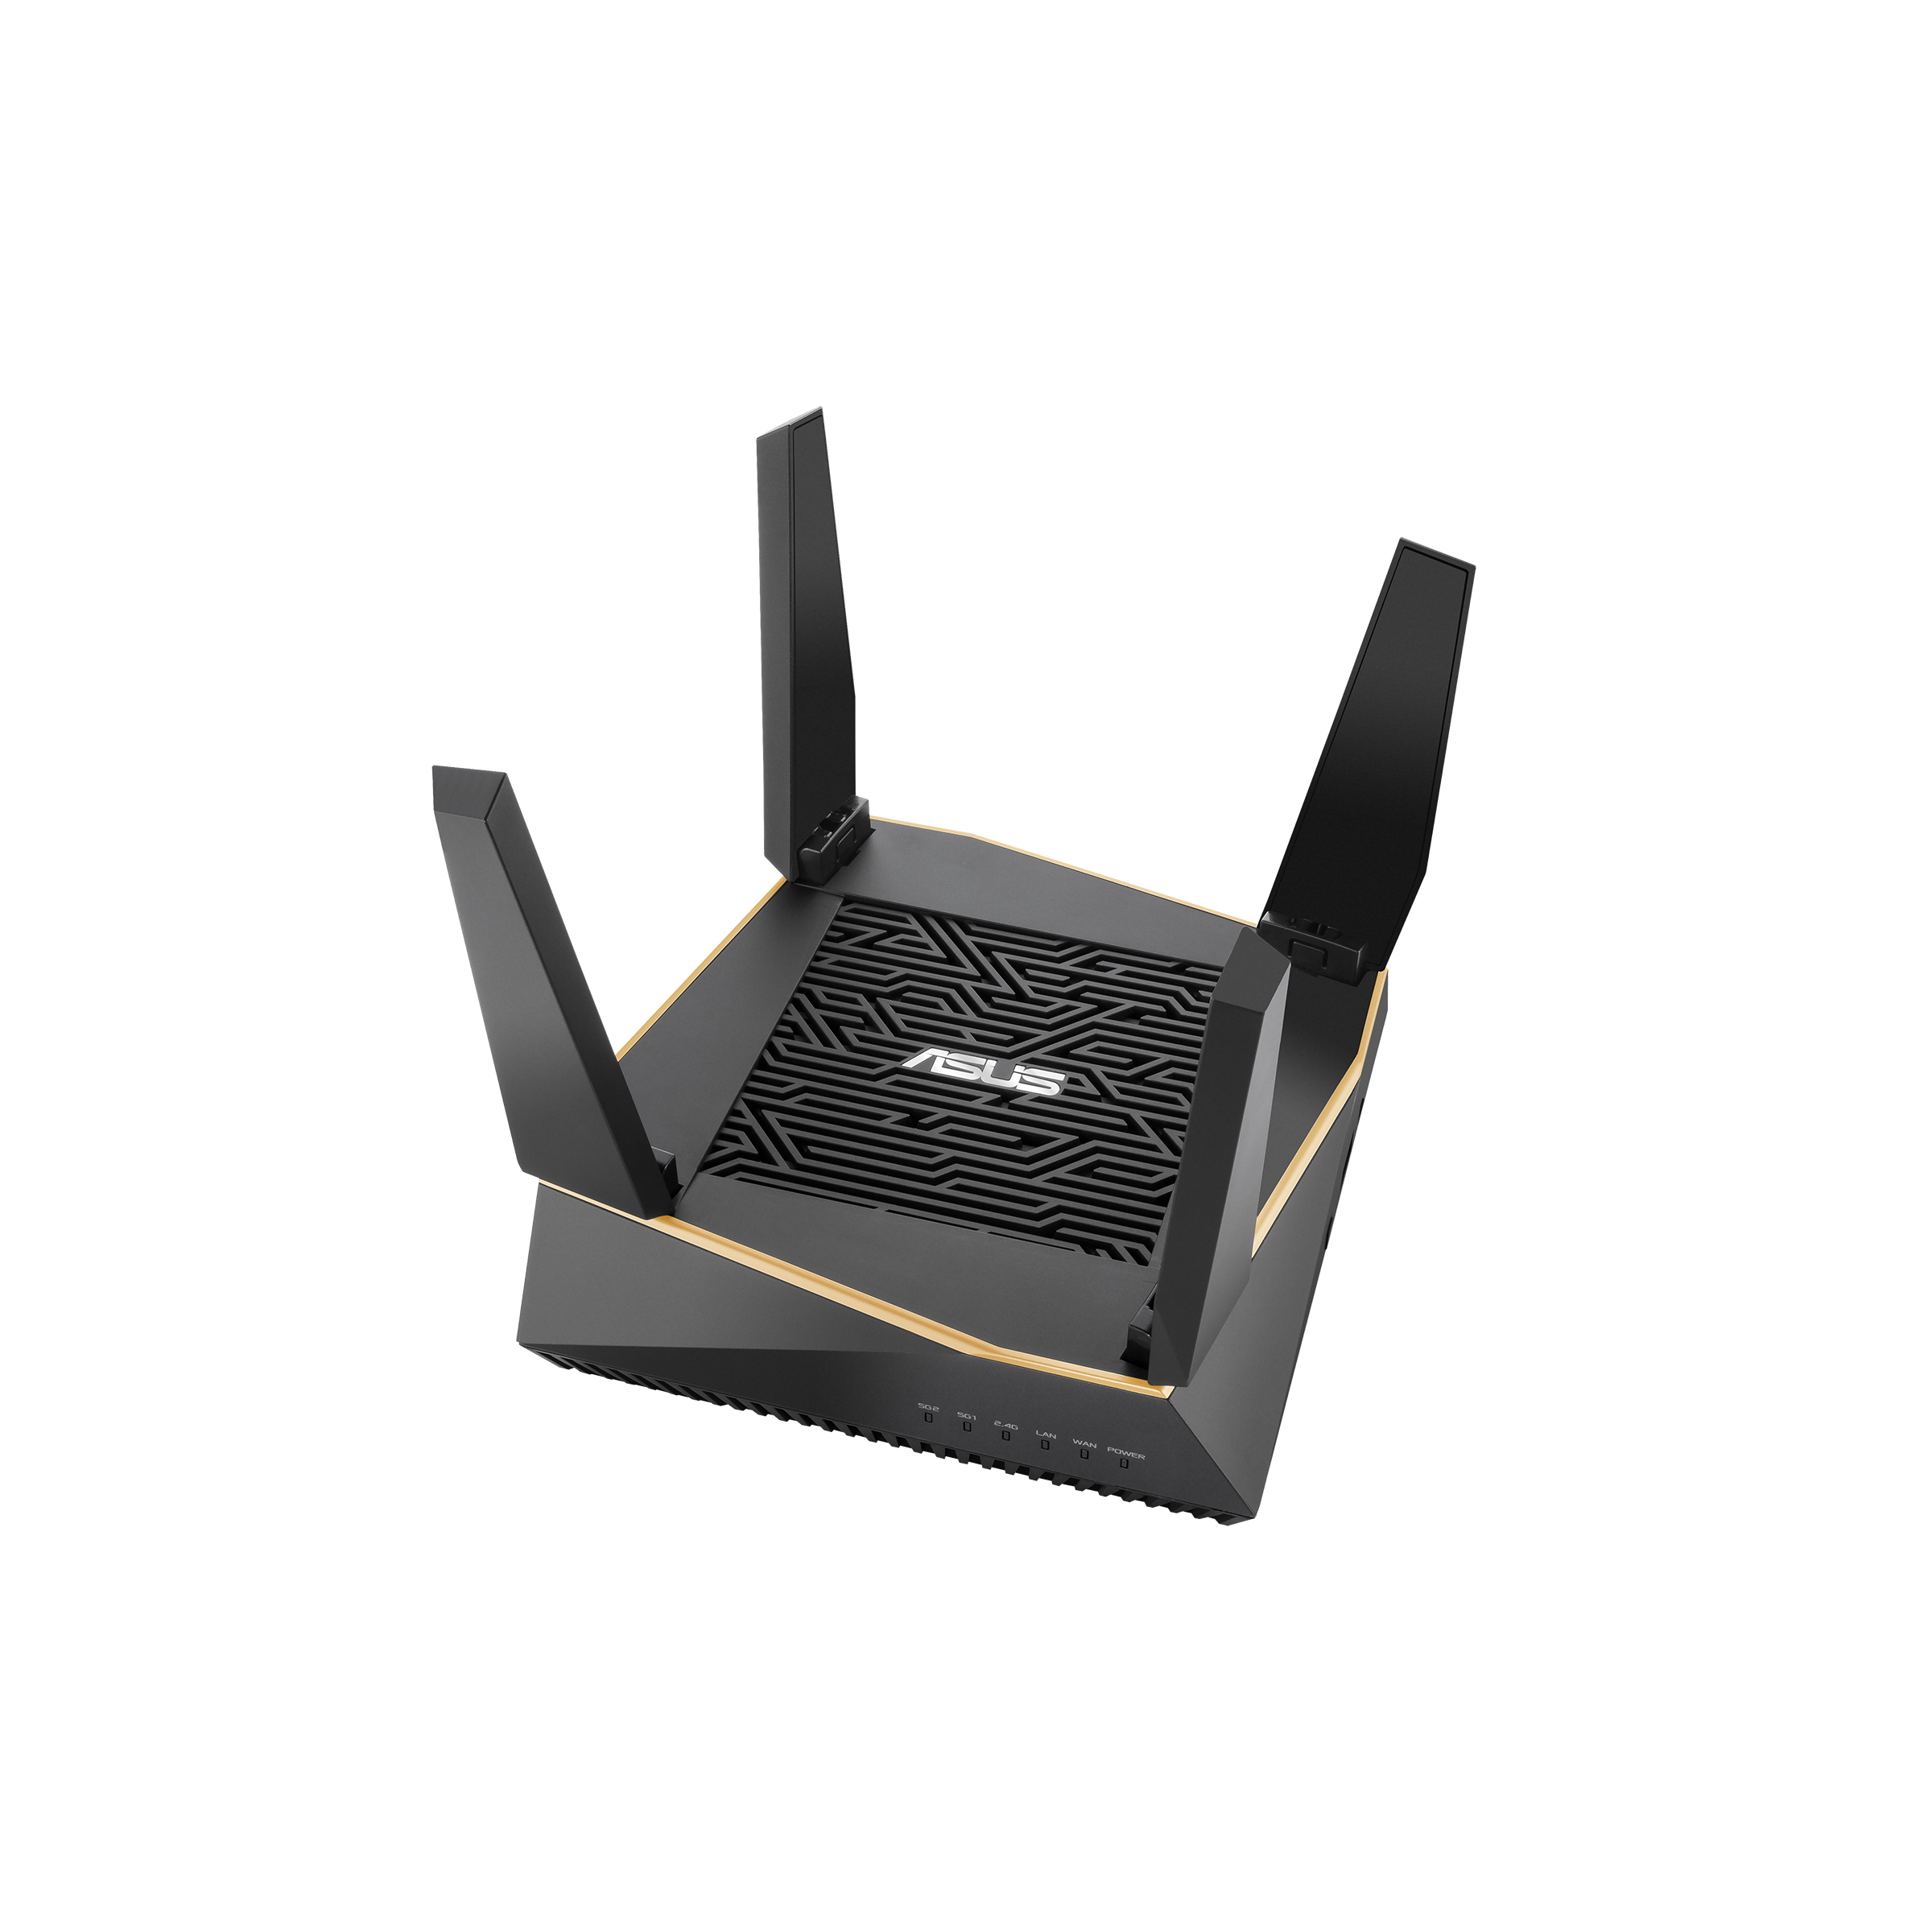 RT-AX92U｜WiFi Routers｜ASUS USA